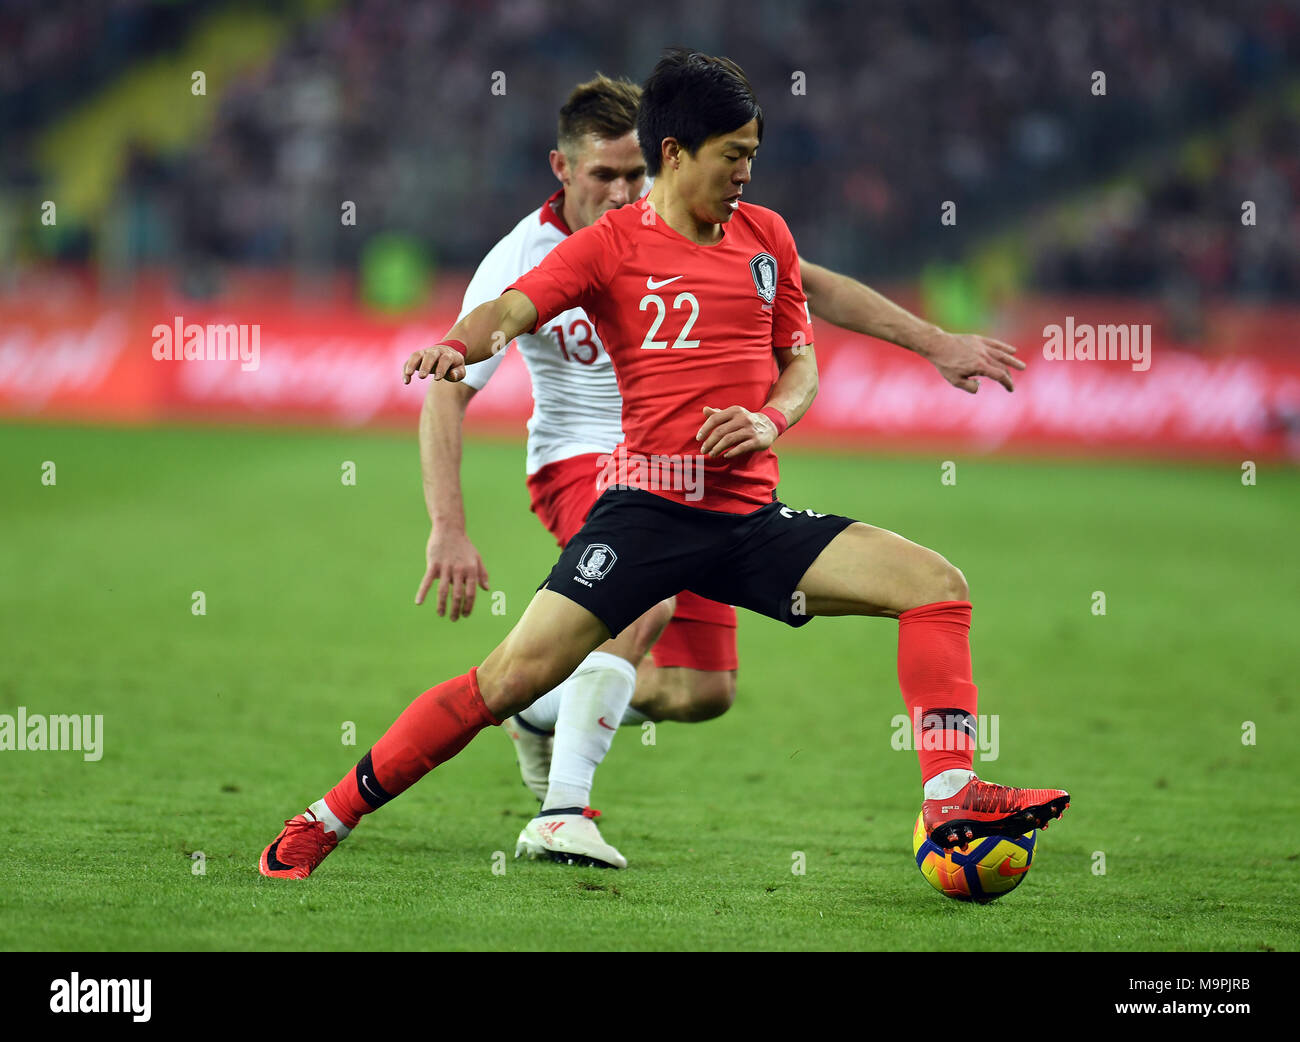 Chorzow, Poland. 27th Mar, 2018. Kwon Chang-hoon (Front) of South Korea vies with Maciej Rybus of Poland during a friendly match between Poland and South Korea in Chorzow, Poland, on March 27, 2018. Poland won 3-2. Credit: Maciej Gillert/Xinhua/Alamy Live News Stock Photo